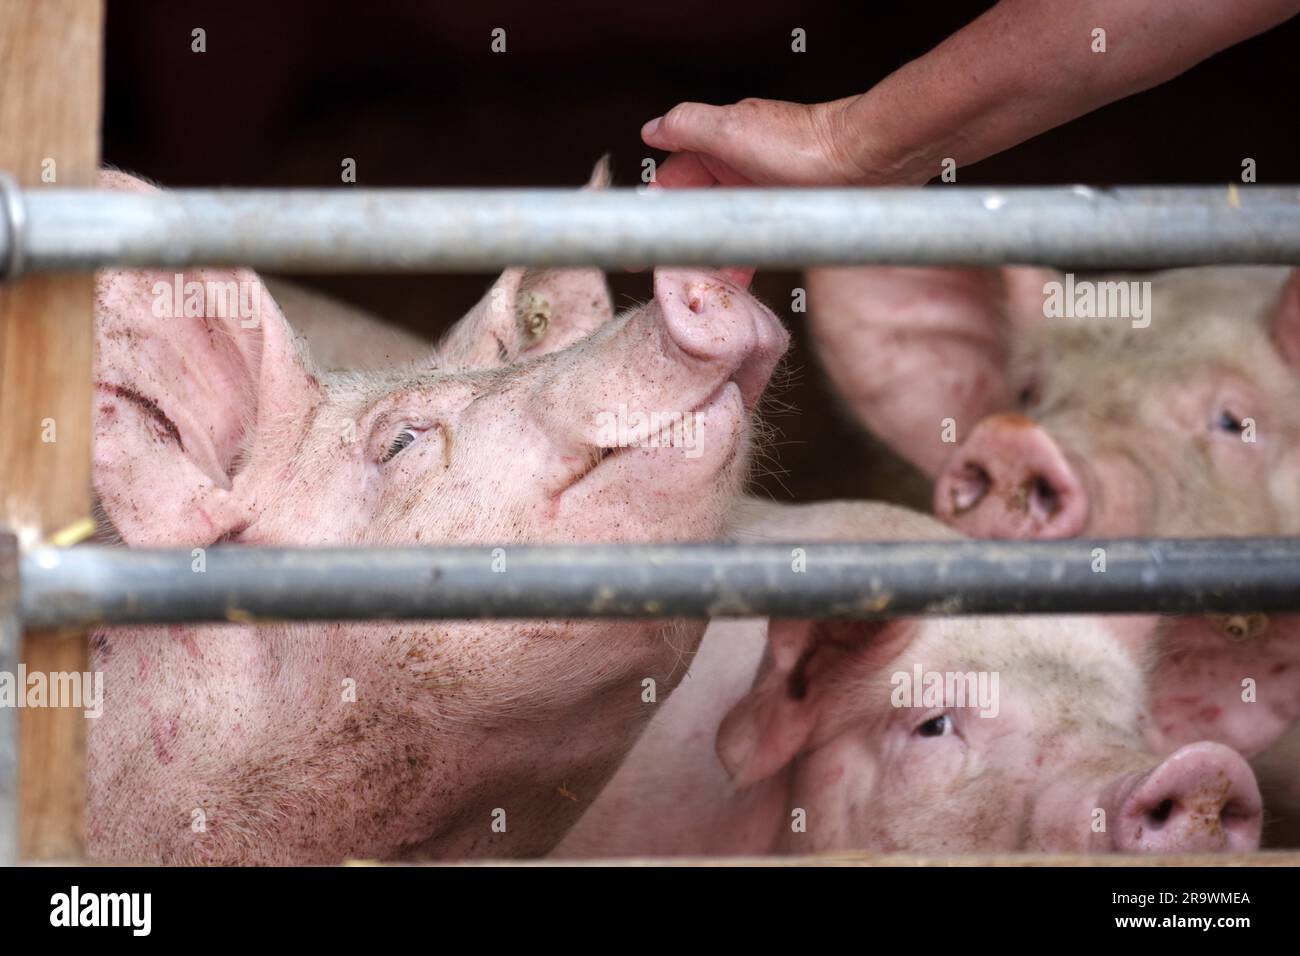 Domestic pigs (Sus scrofa domesticus), pig, three, pigsty, farming, fence, hand, Three pigs are standing behind the fence and one pig is being Stock Photo